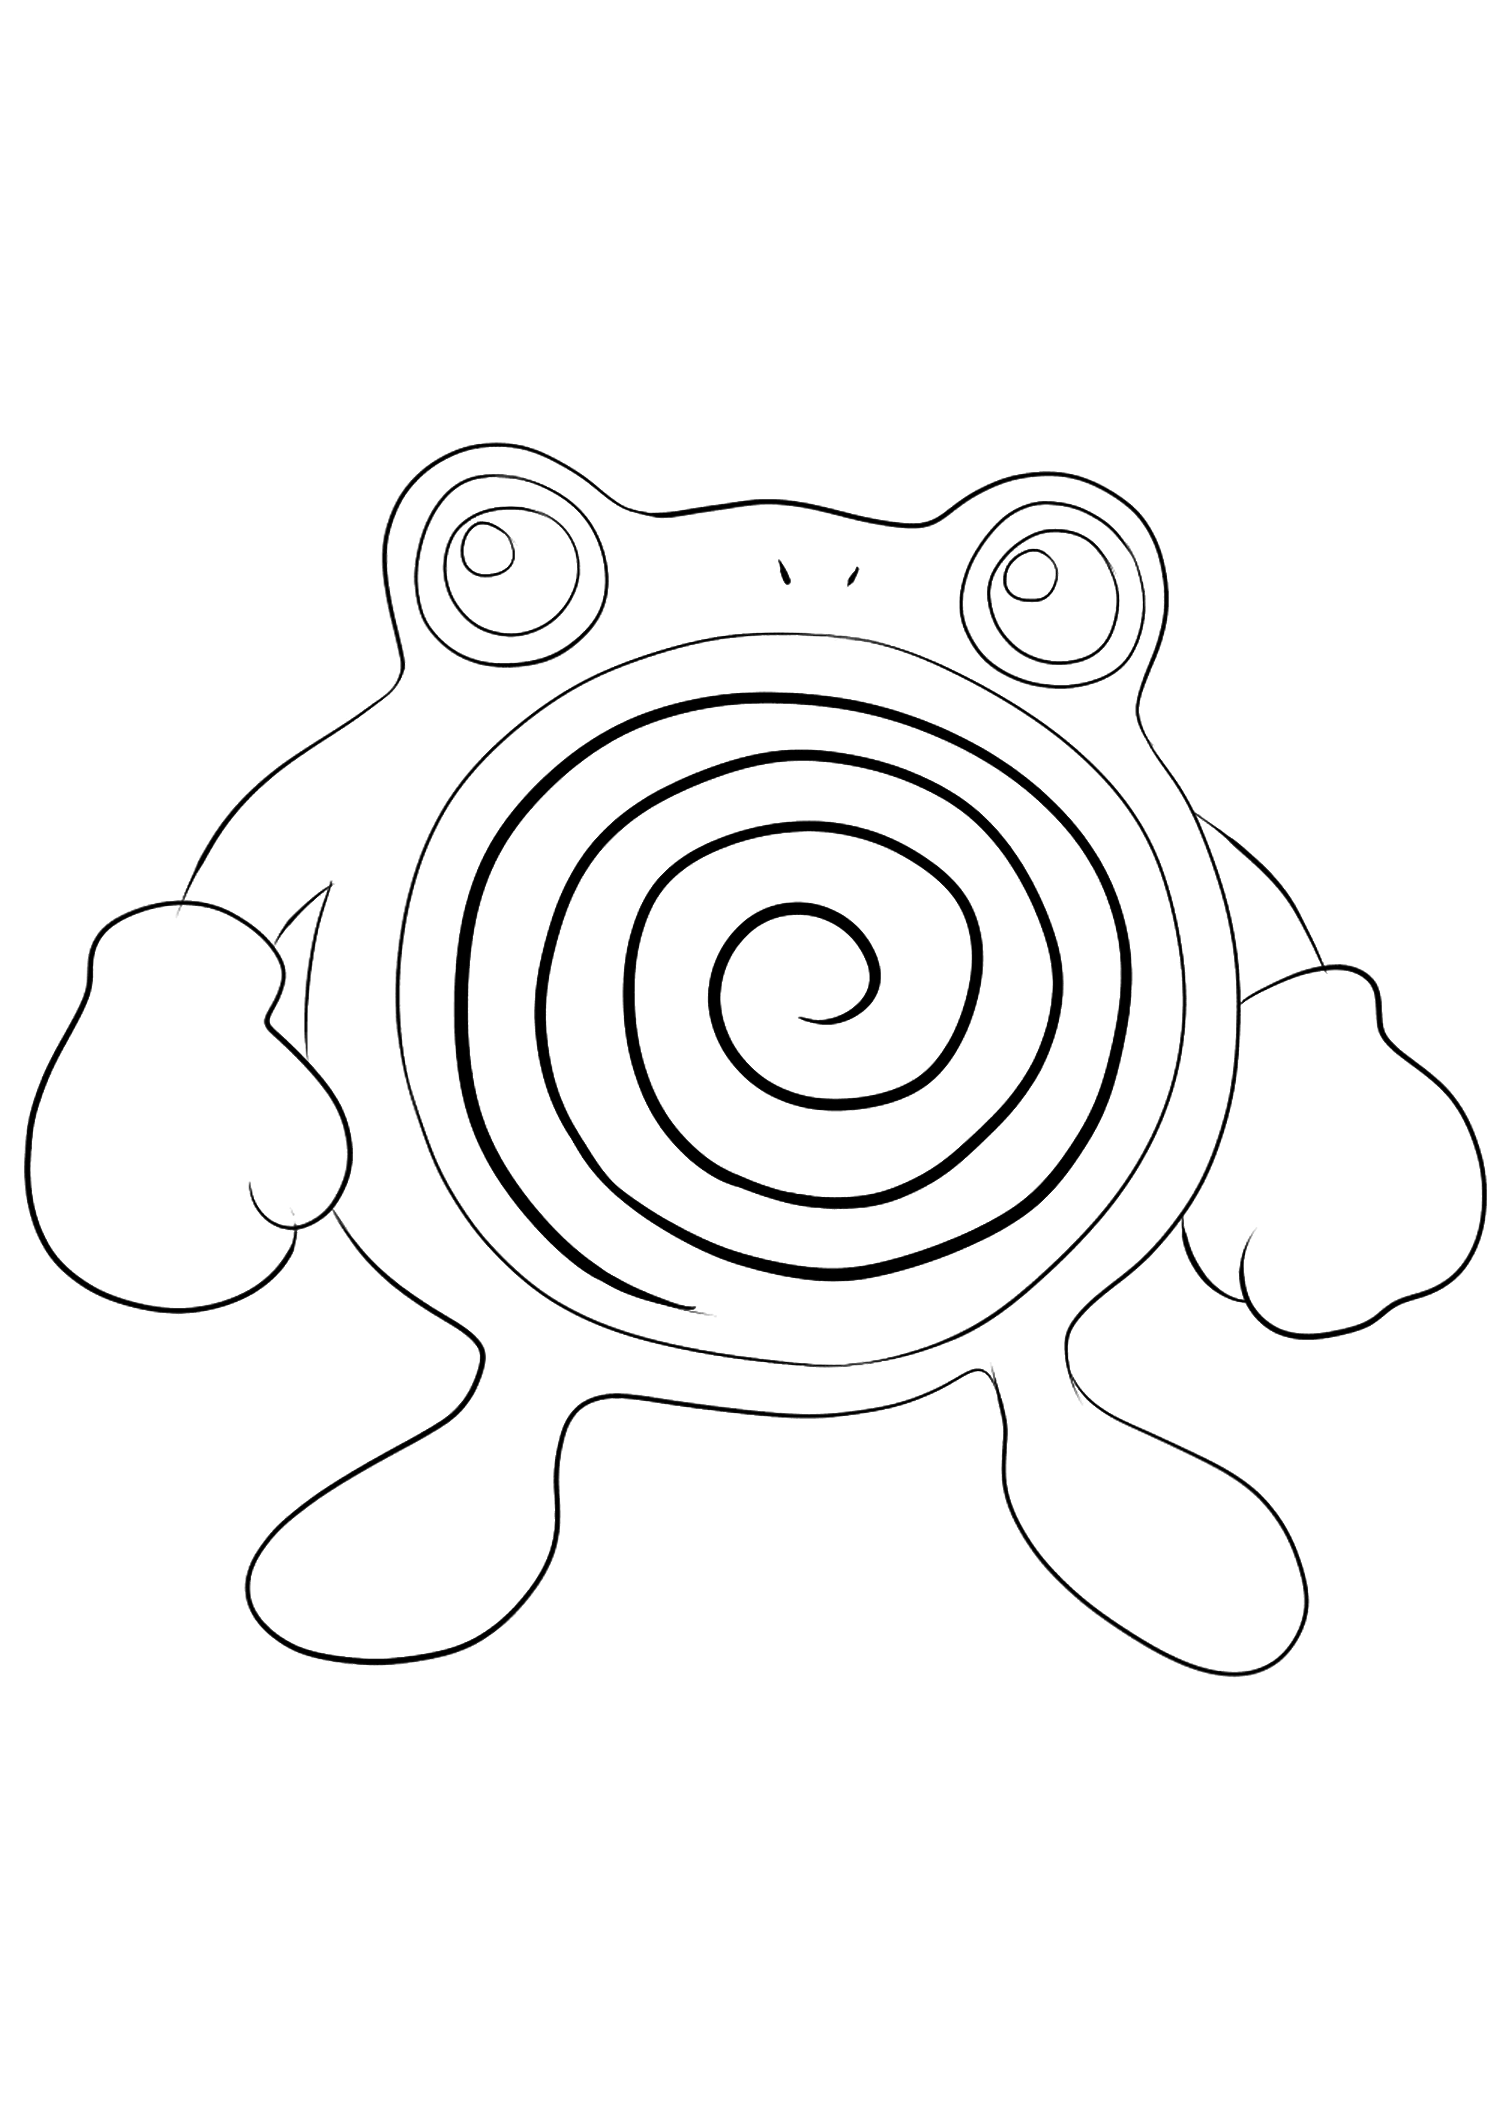 Poliwhirl (No.61). Poliwhirl Coloring page, Generation I Pokemon of type WaterOriginal image credit: Pokemon linearts by Lilly Gerbil on Deviantart.Permission:  All rights reserved © Pokemon company and Ken Sugimori.